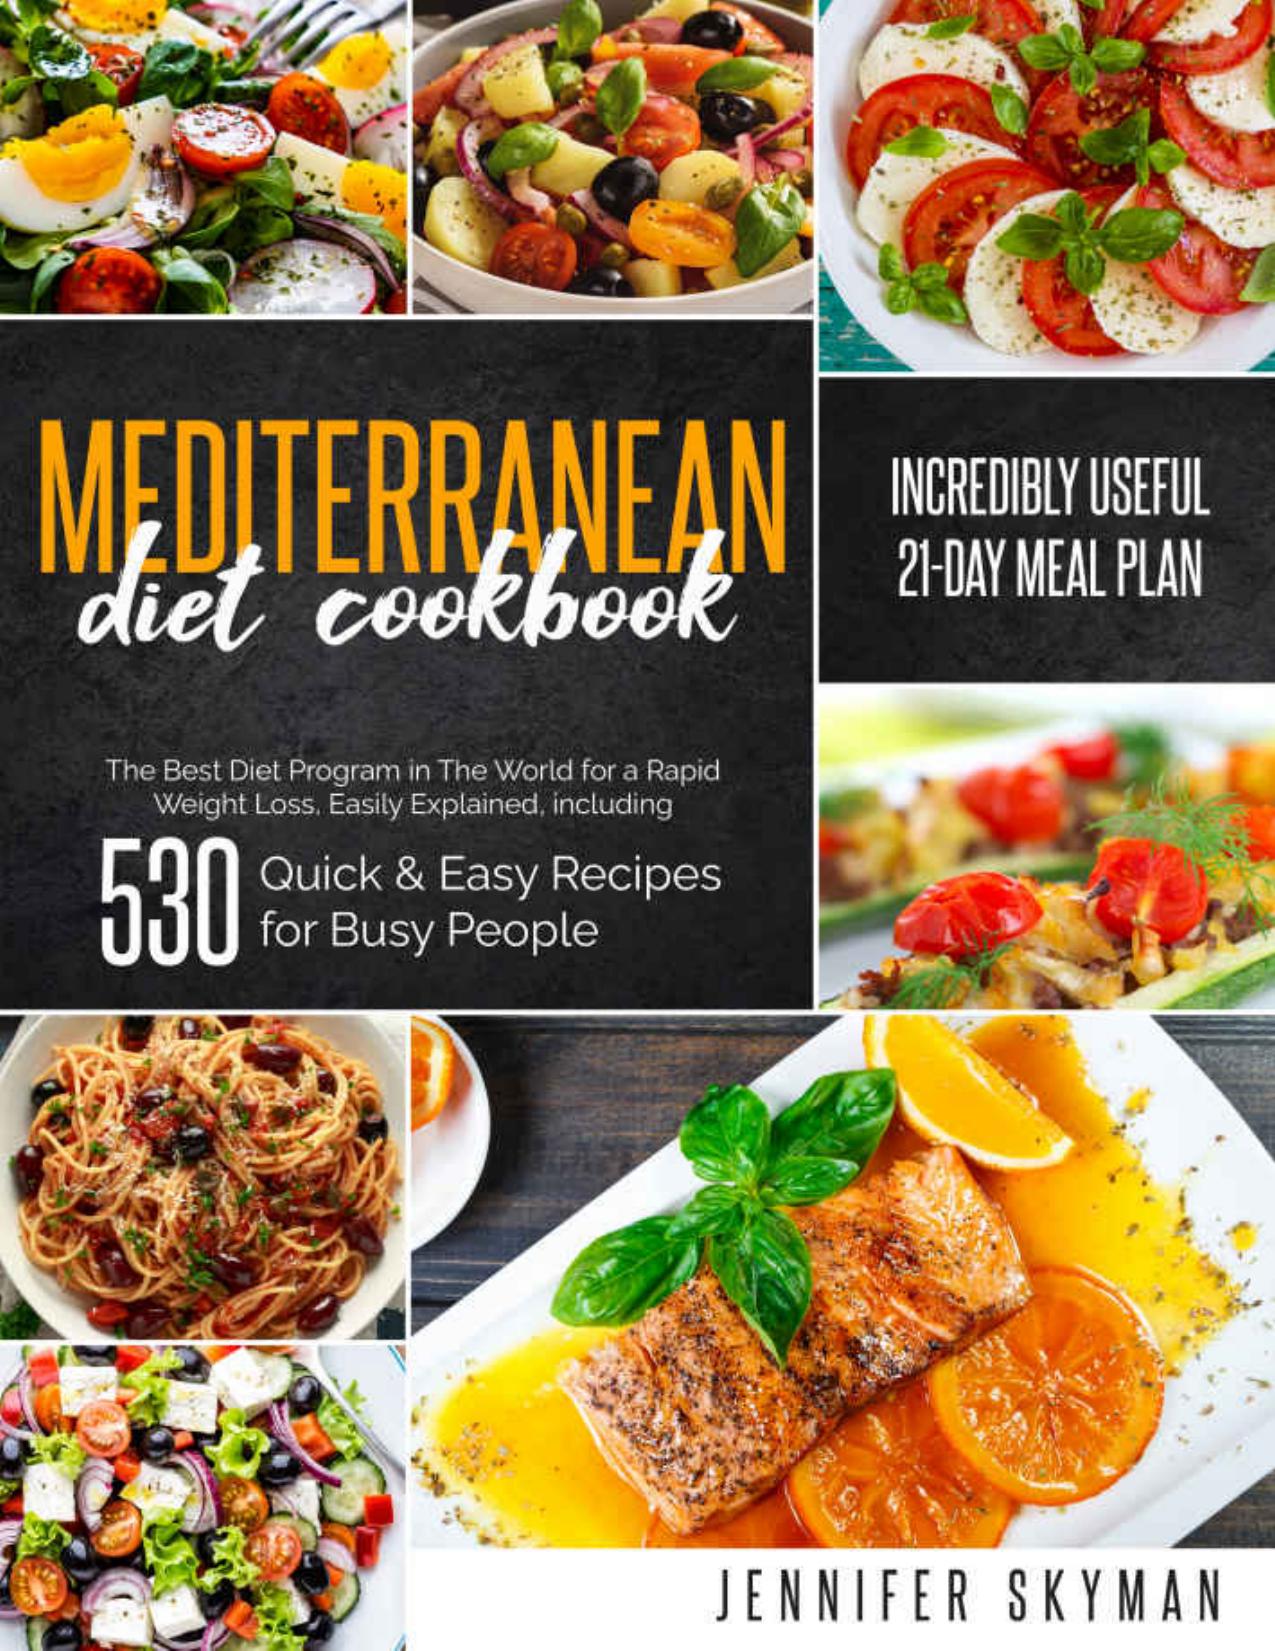 Mediterranean Diet Cookbook: The Best Diet Program in The World for a Rapid Weight Loss, Easily Explained, including 530 Quick & Easy Recipes for Busy People and an Incredibly Useful 21-Day Meal Plan by Jennifer Skyman